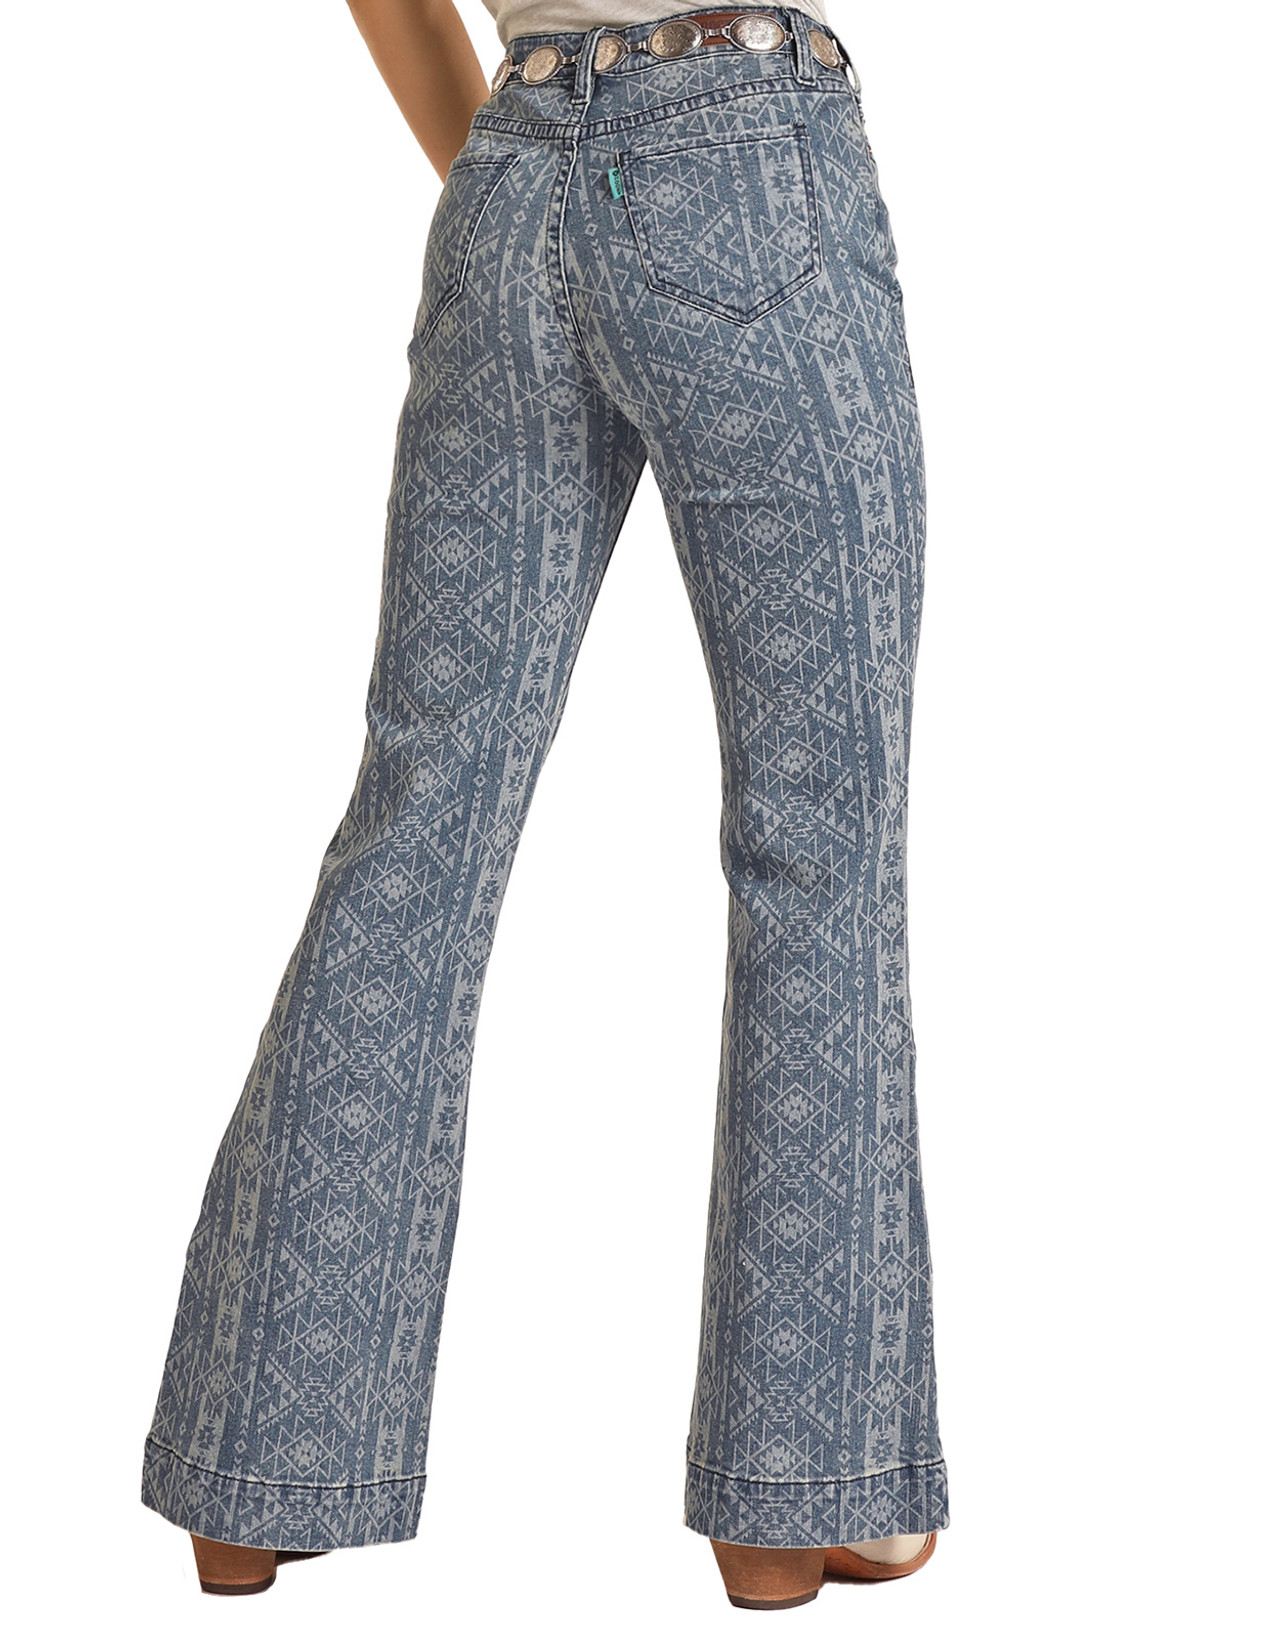 Women's Jeans - Western Jeans, Levi's Jeans, and More